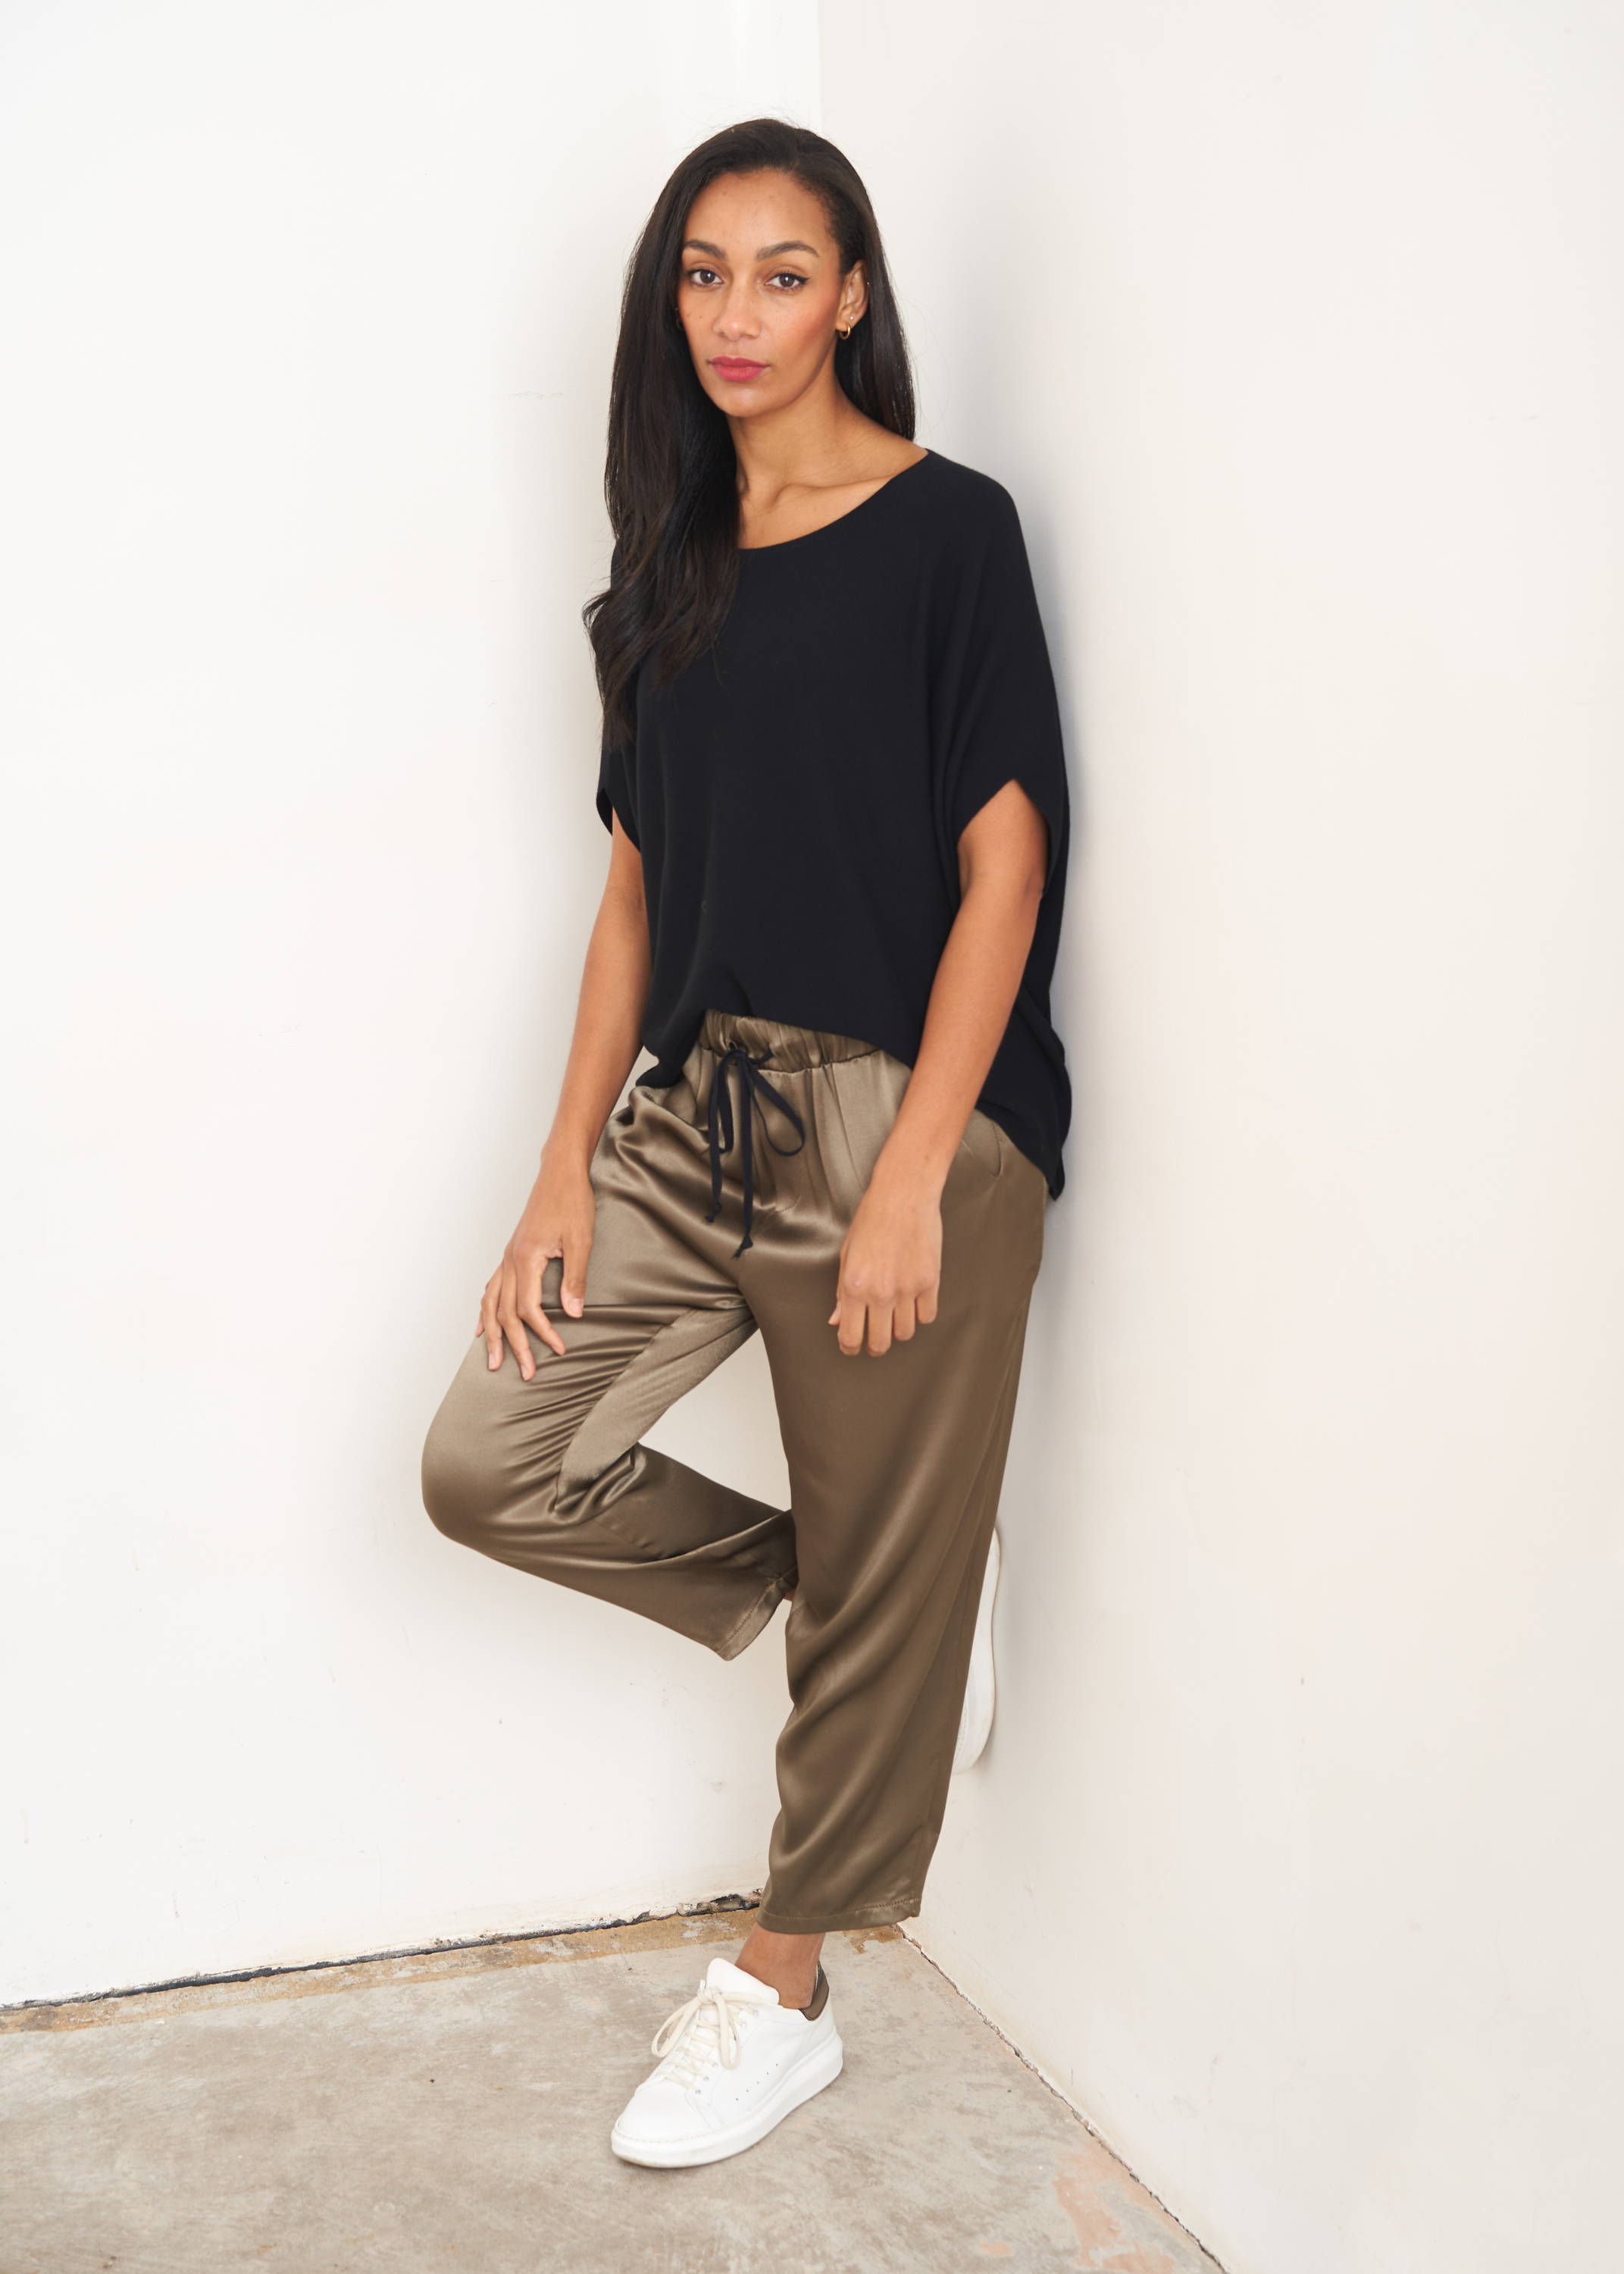 A model wearing a black capped sleeve knitted top with khaki coloured straight leg satin trousers and white trainers